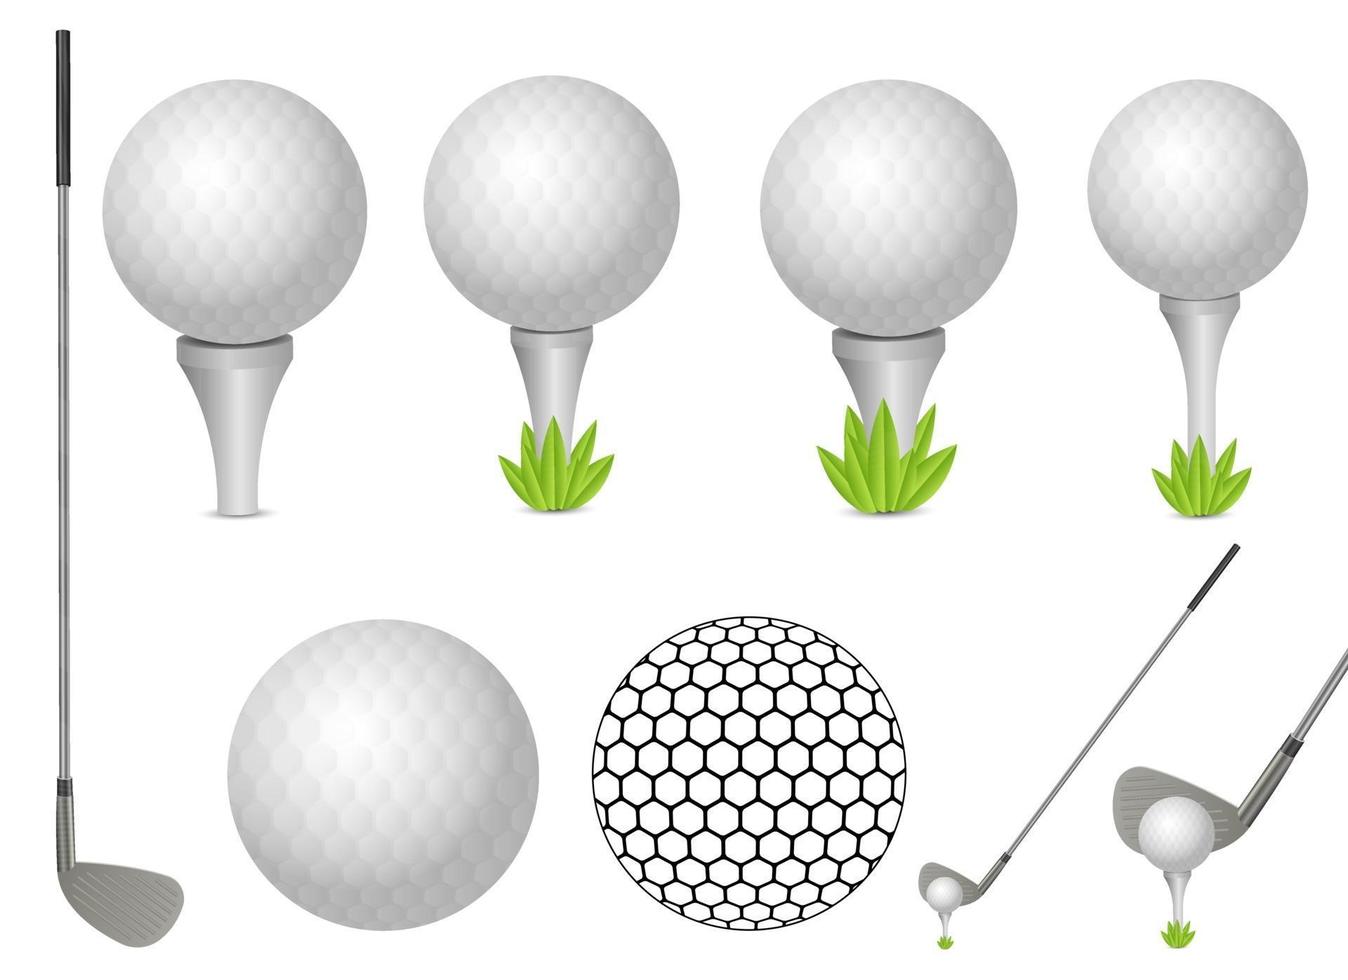 Golf ball and putter vector design illustration set isolated on white background